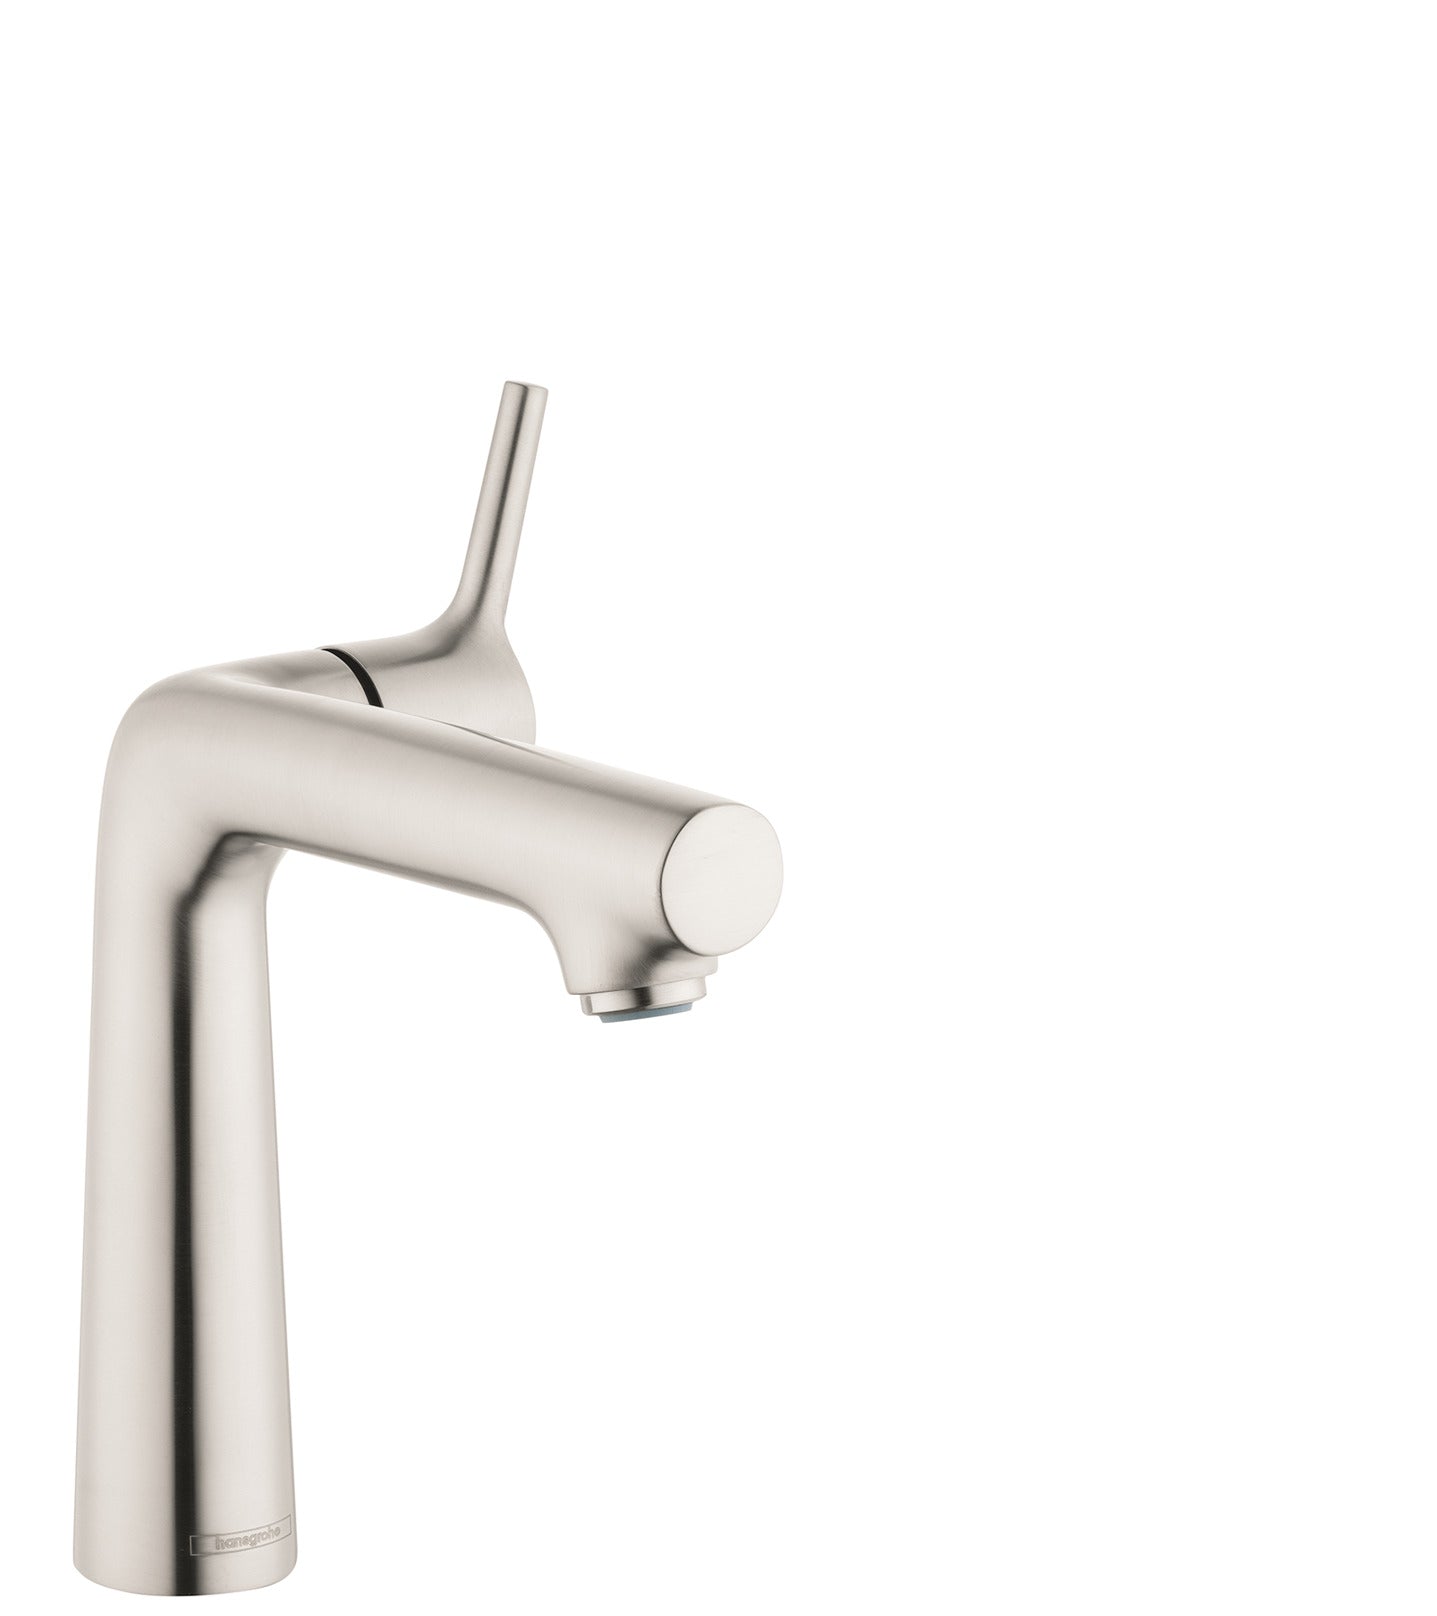 HANSGROHE 72113821 Brushed Nickel Talis S Modern Single Hole Bathroom Faucet 1.2 GPM